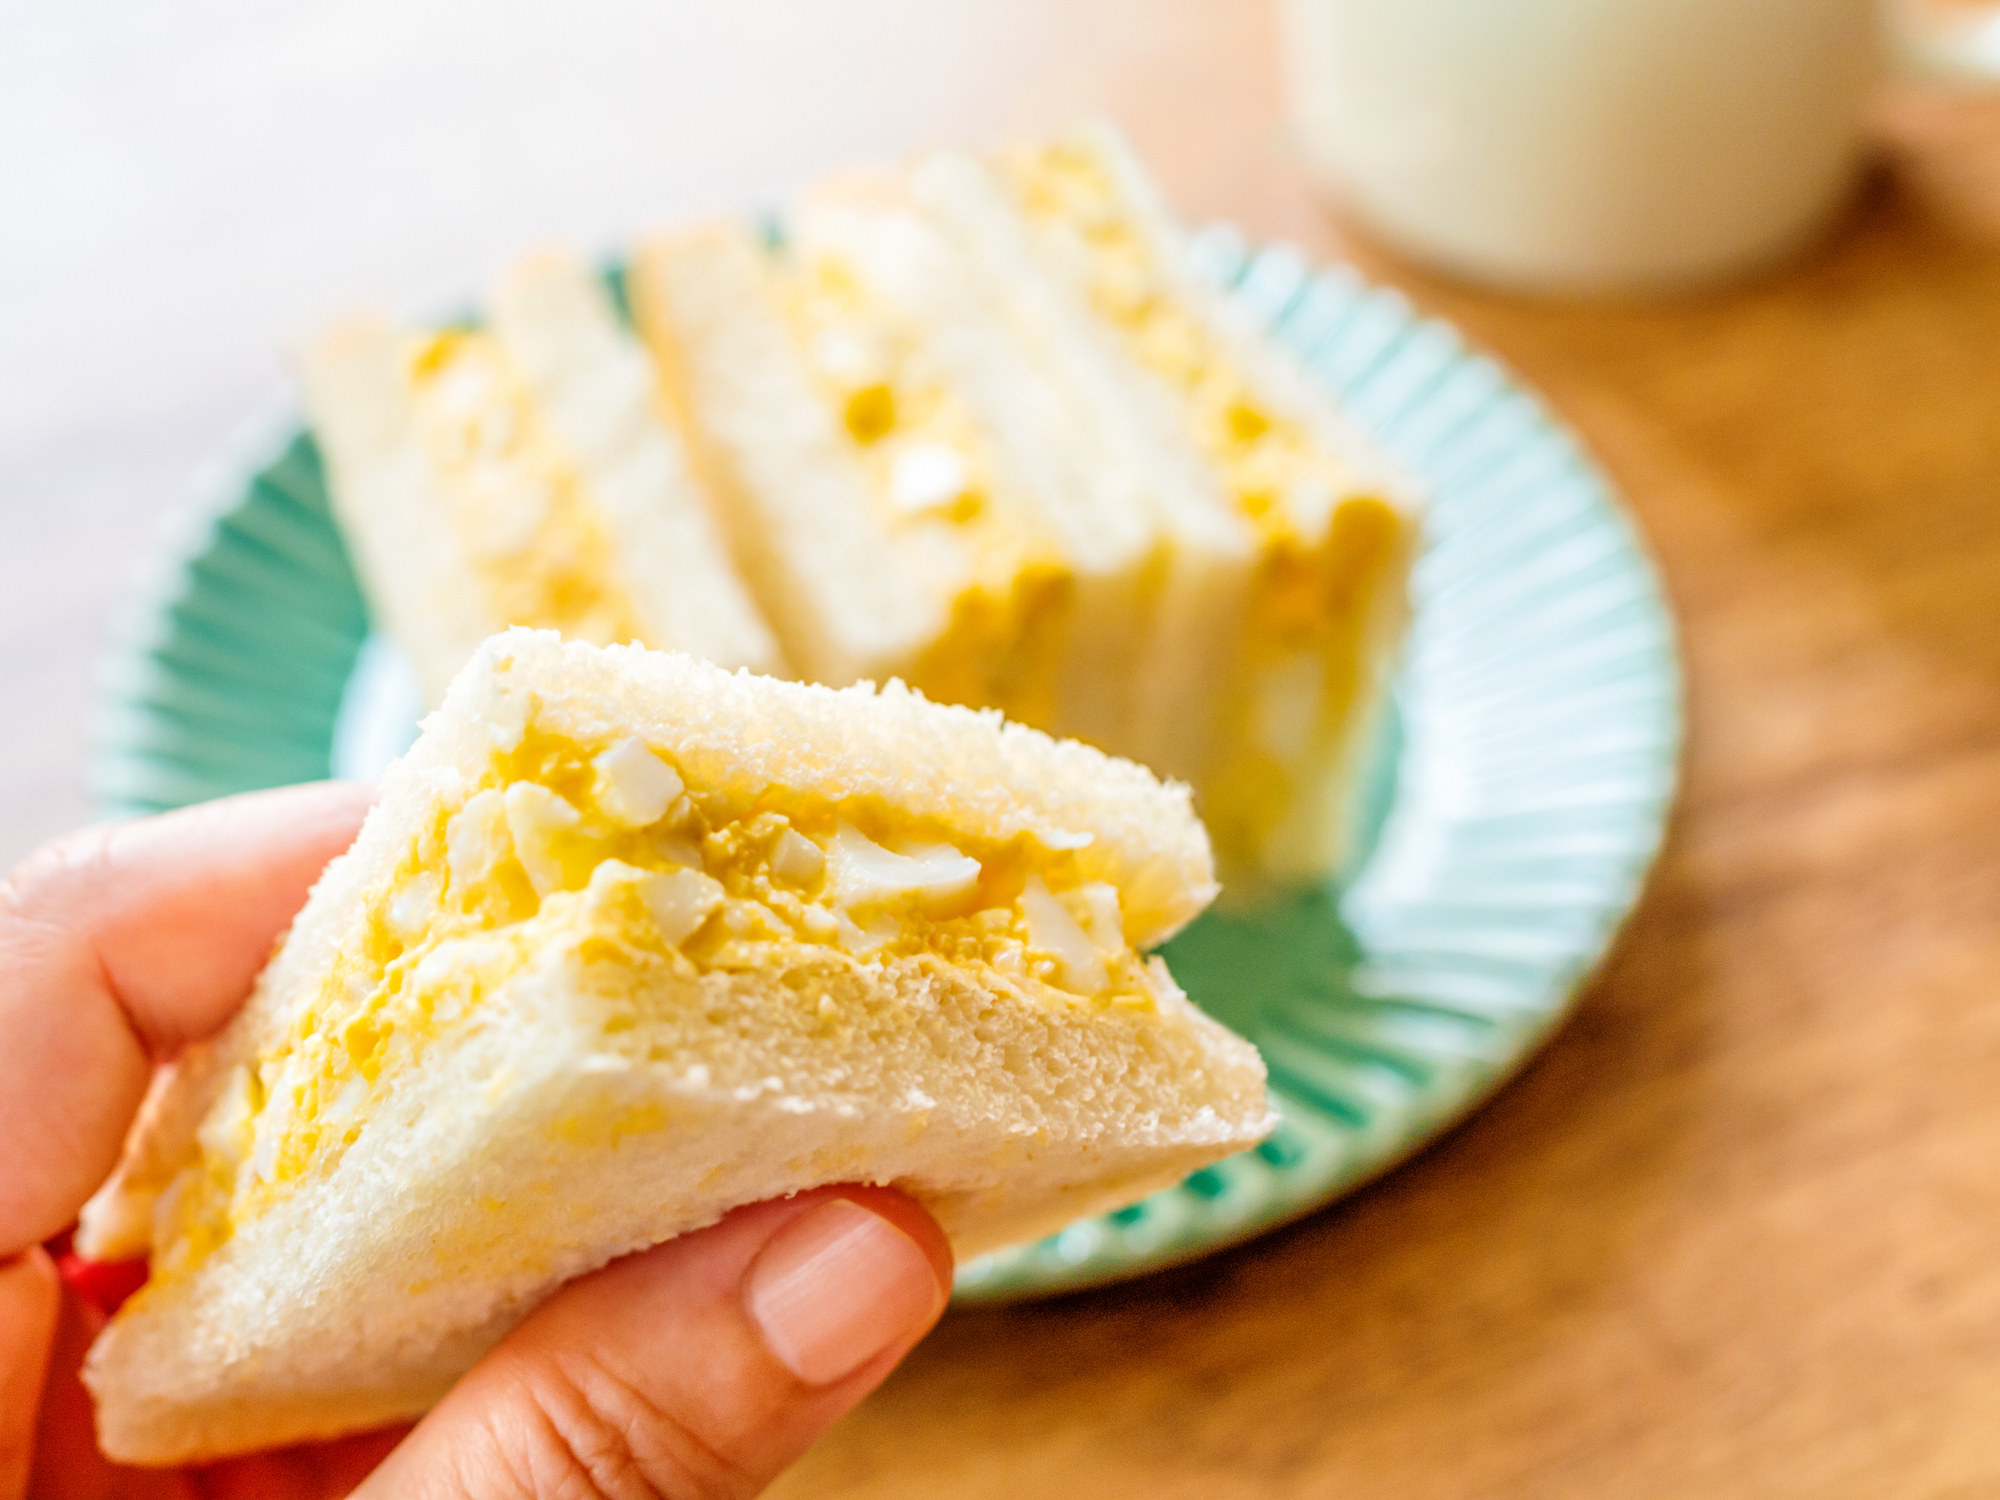 A hand holding a slice of a Japanese egg salad sandwich